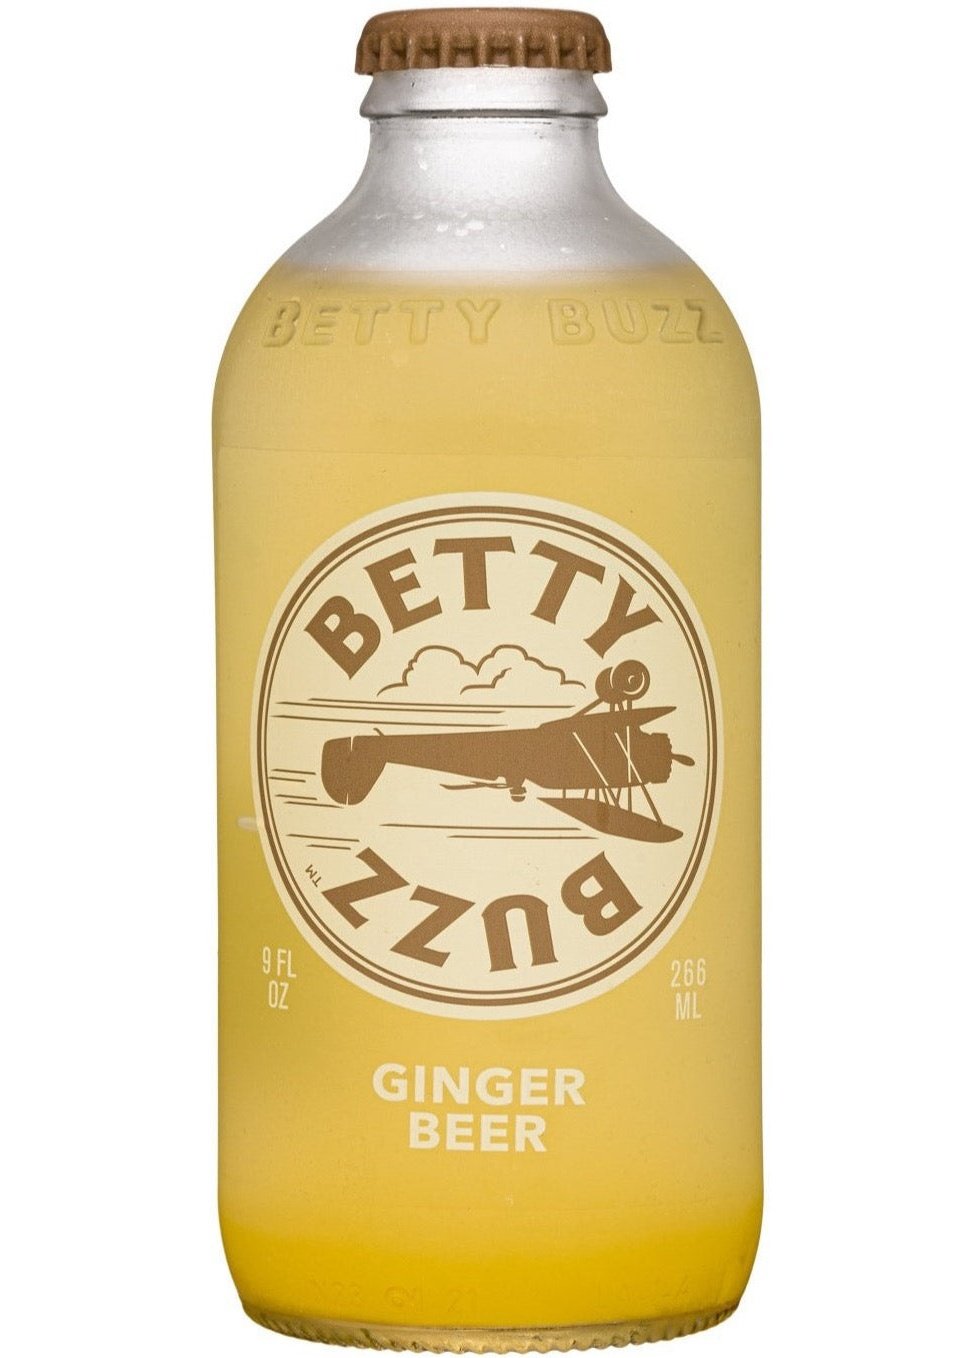 BETTY BUZZ Ginger Beer